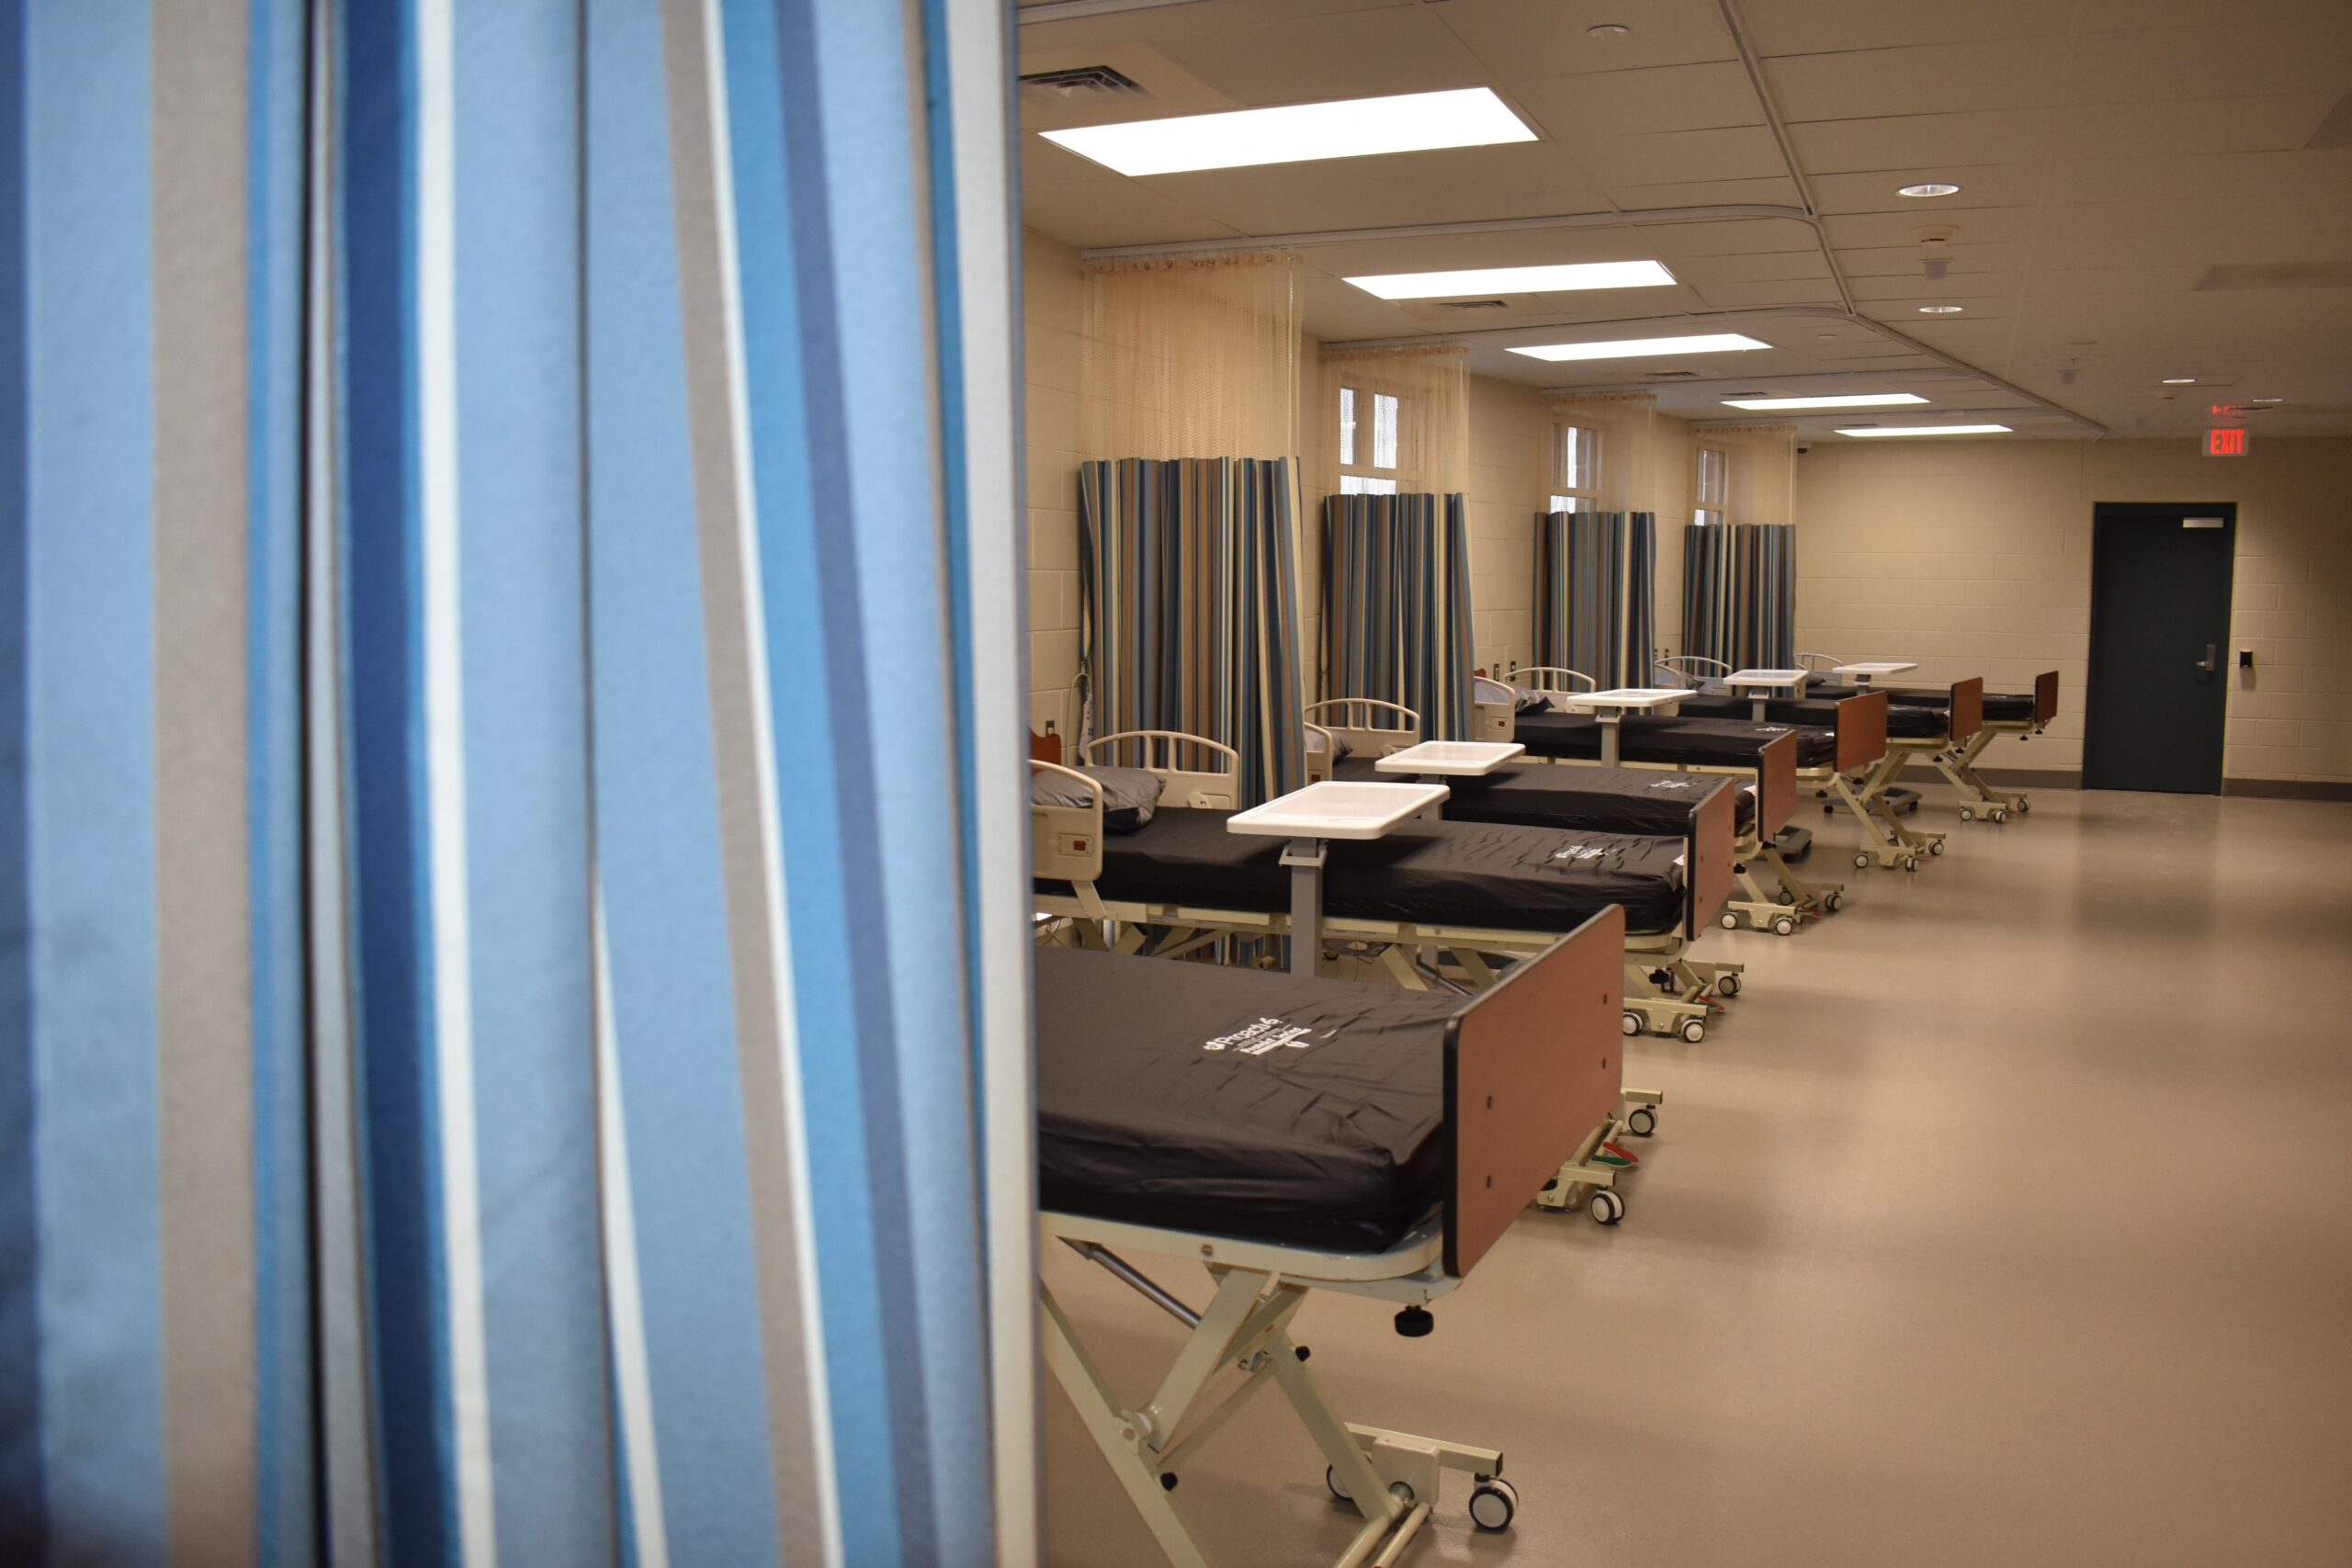 Wisconsin prison opens assisted living unit for incarcerated people who need advanced care